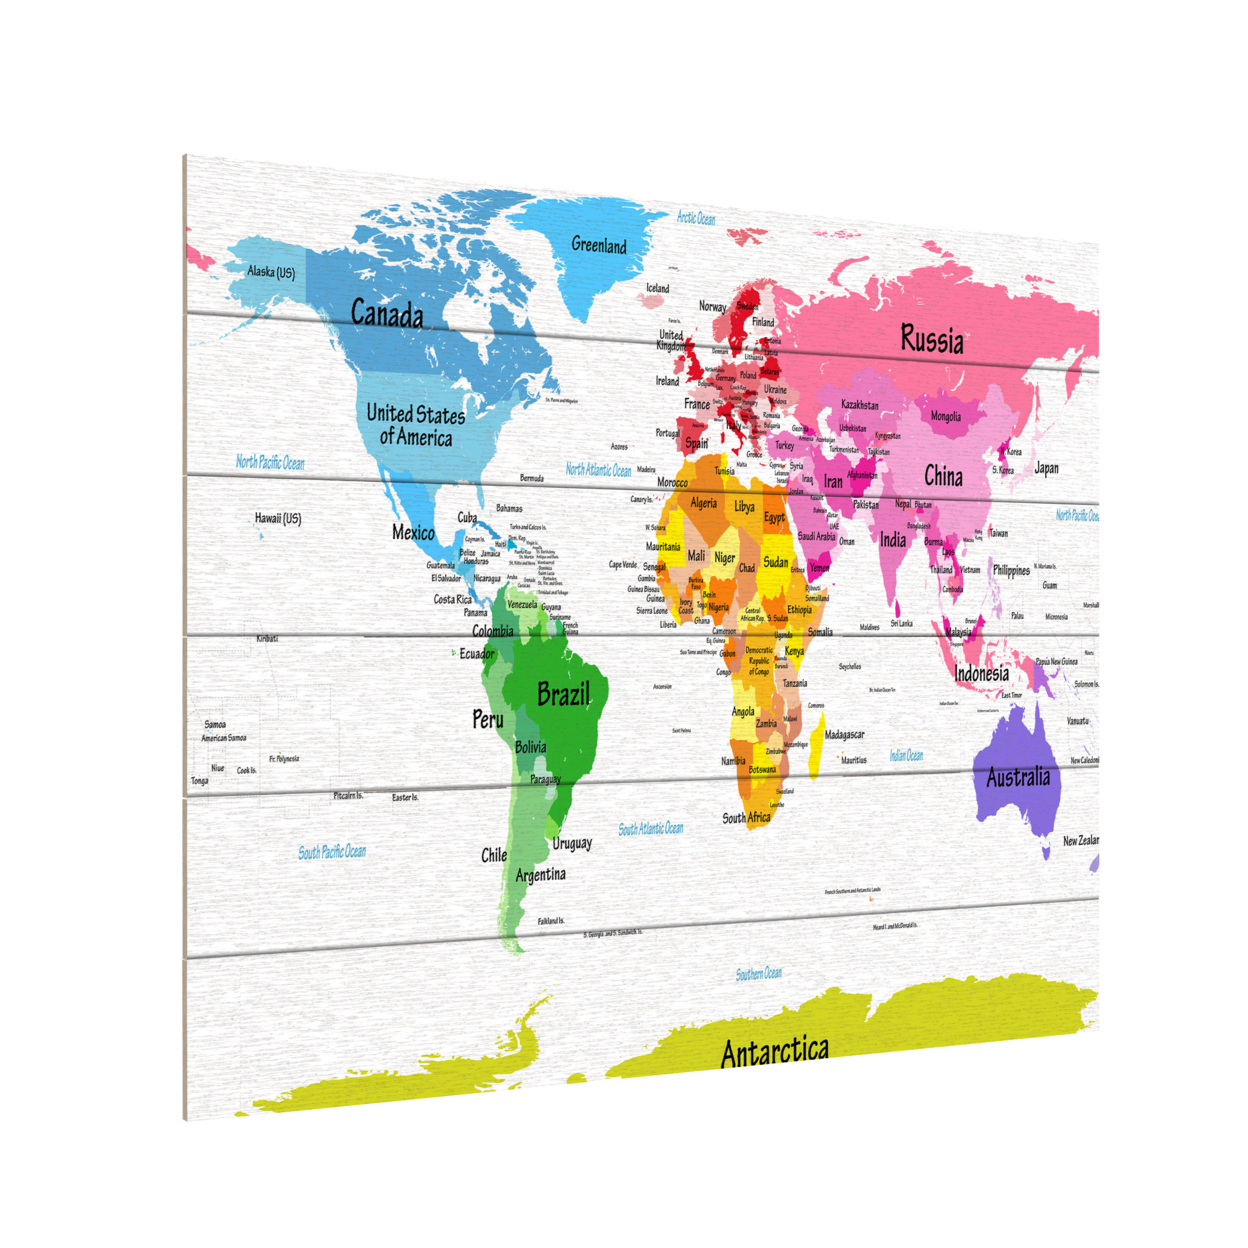 Wooden Slat Art 18 X 22 Inches Titled World Map For Kids II Ready To Hang Home Decor Picture